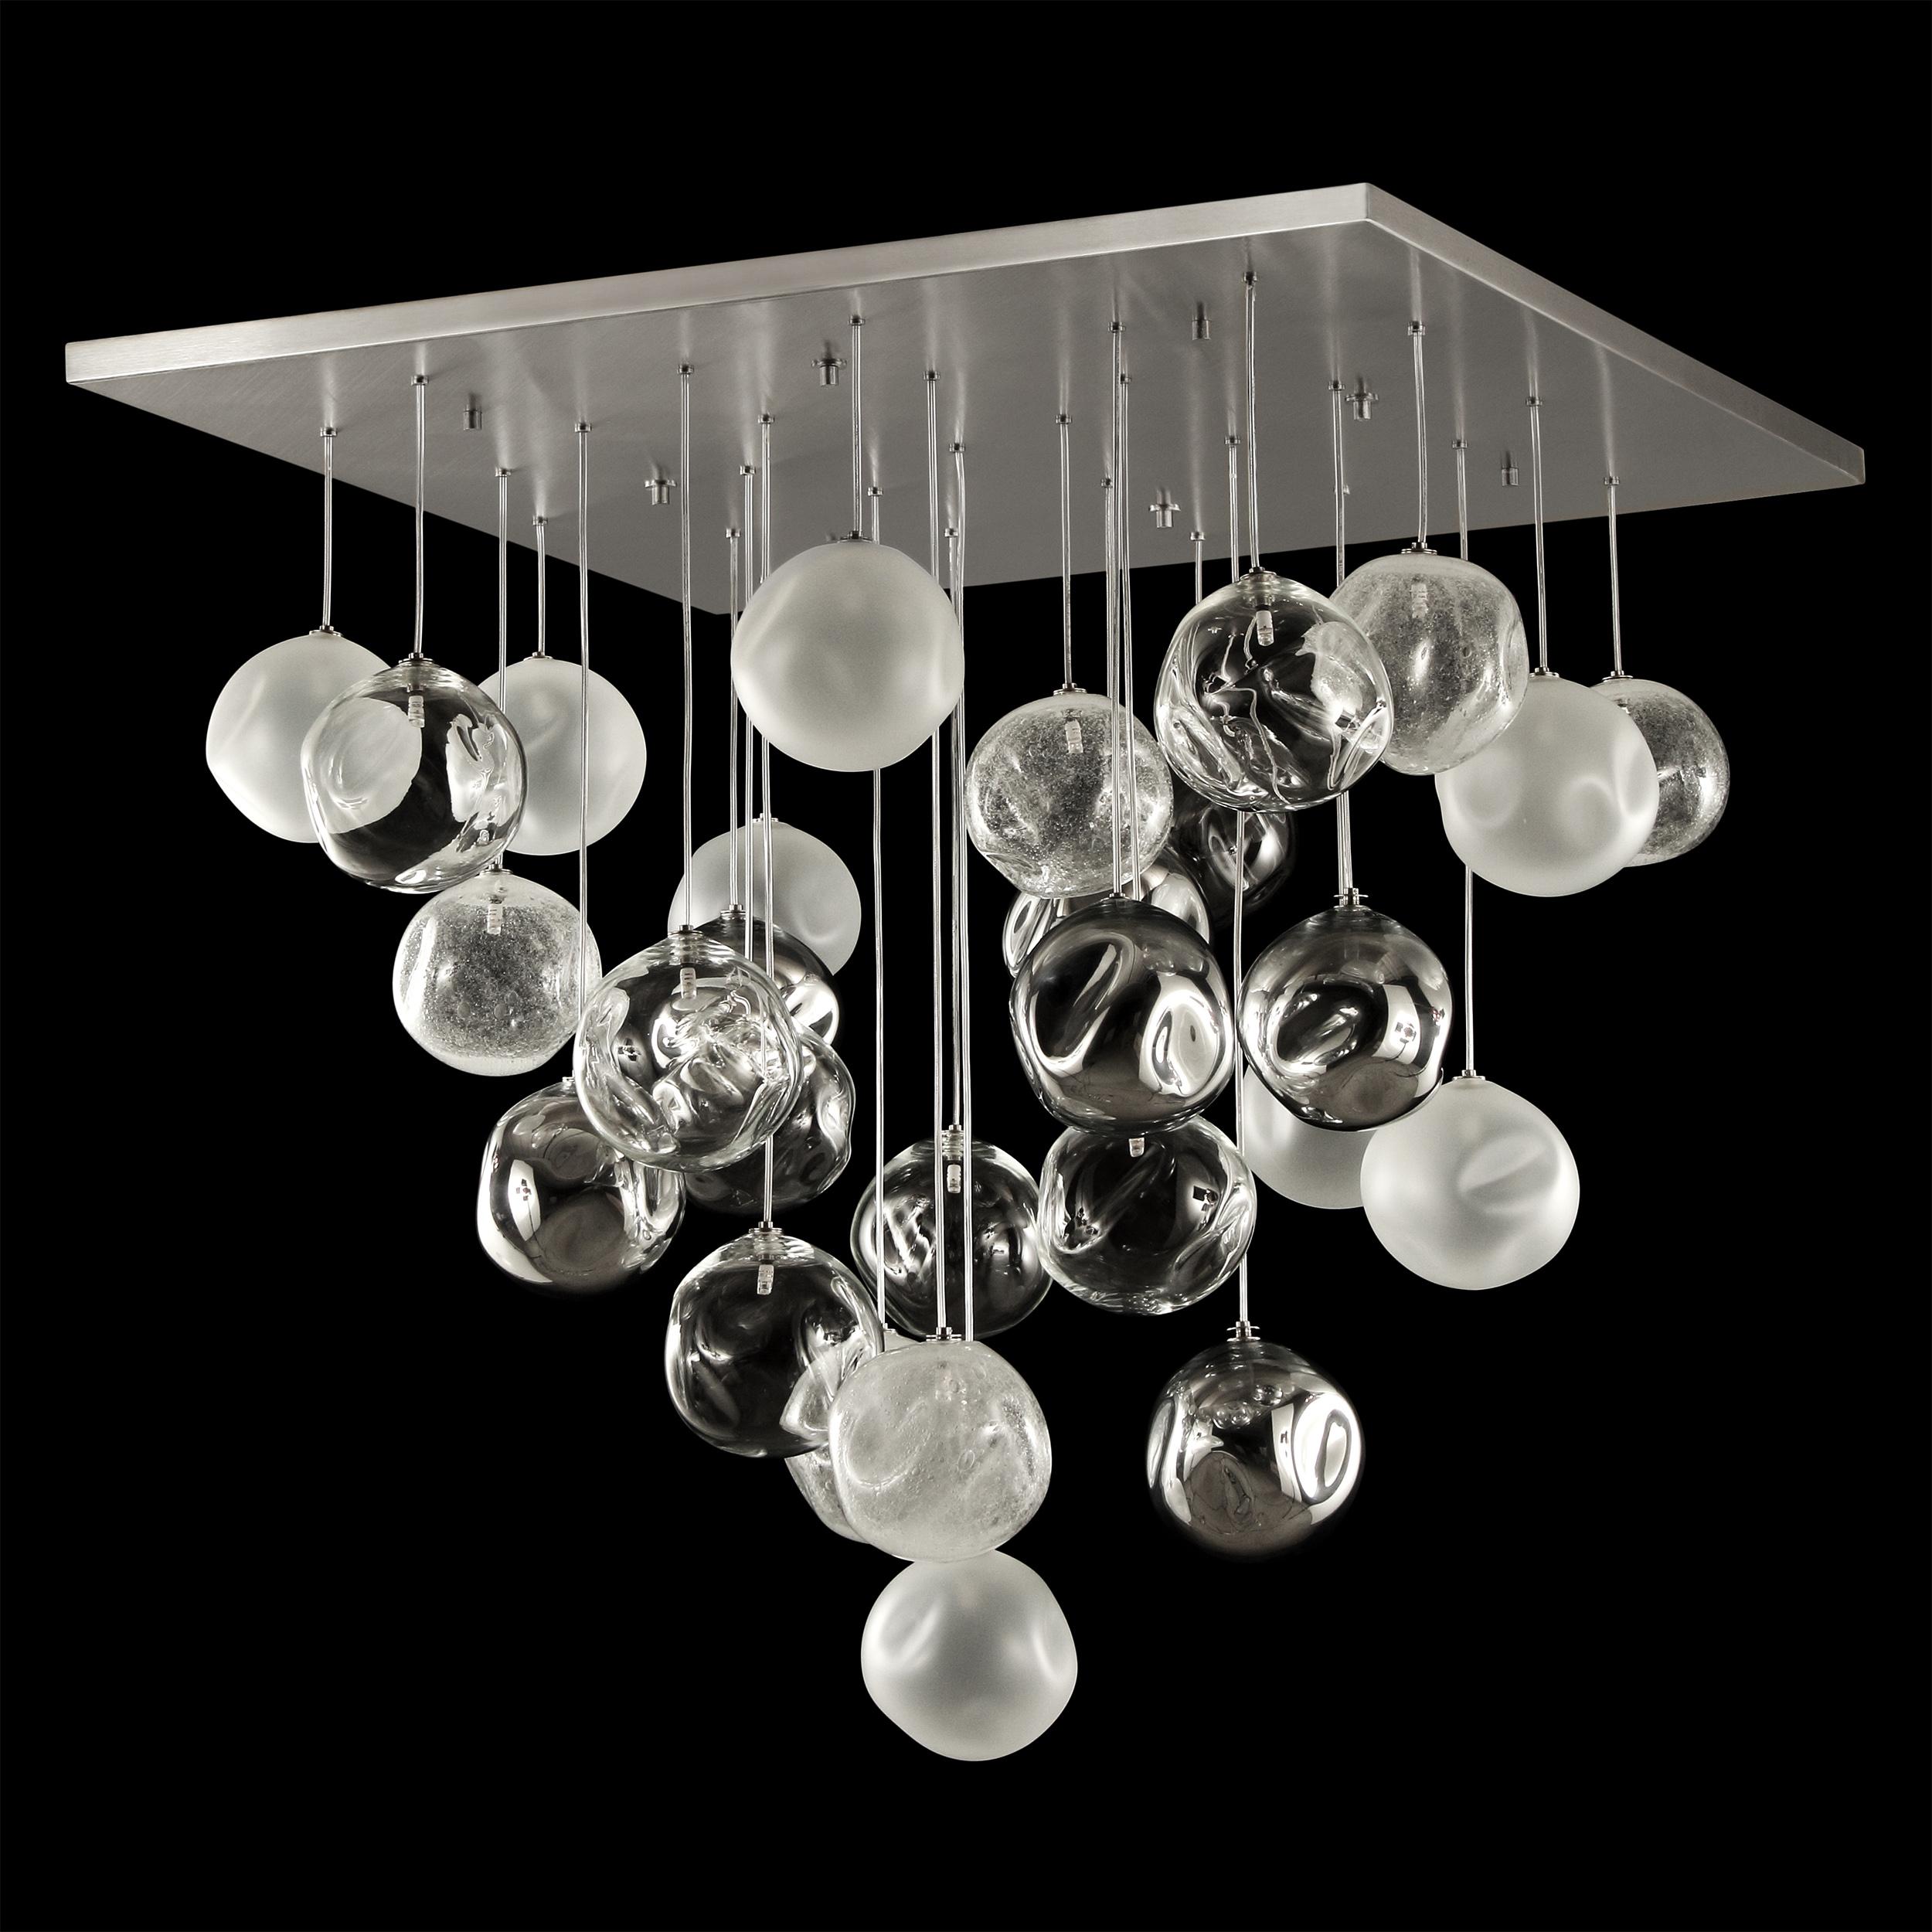 Artistic ceiling lamp, glass spheres in clear, satined, mirrored and Pulegoso size 100x100cm
Elegant and unmistakable, suggestive and poetical, soft and delicate are some of the adjectives that can be used to describe the blown glass ball